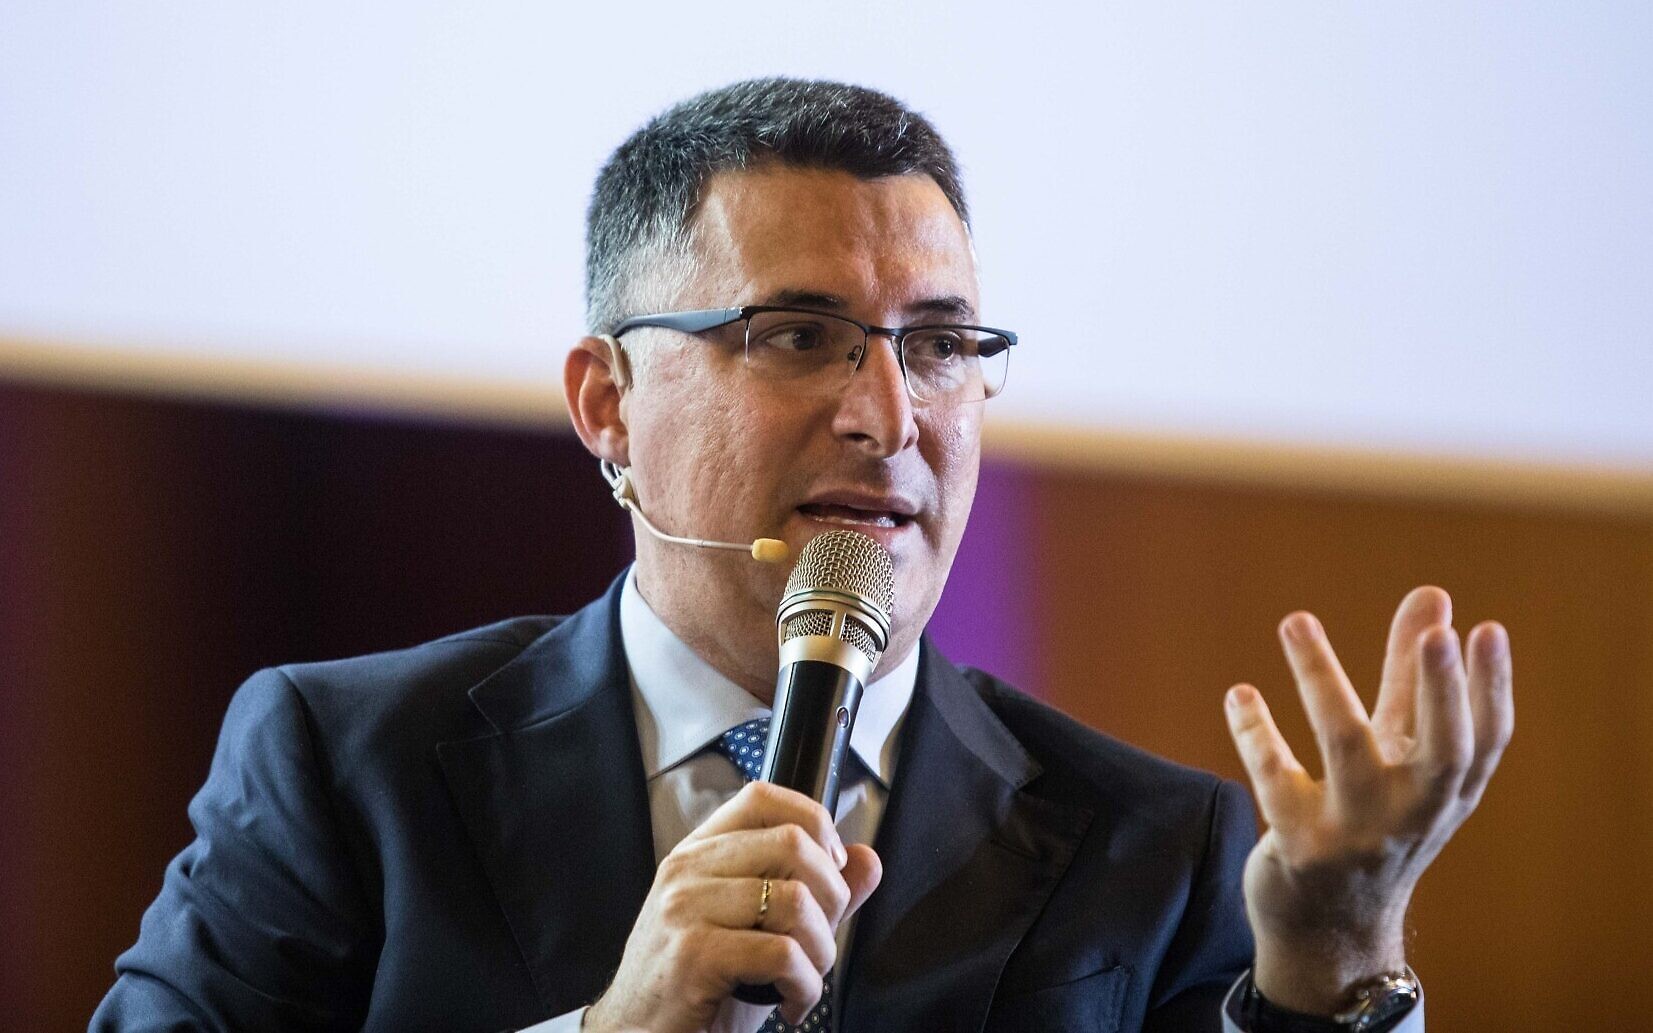 Likud MK Gideon Sa’ar speaks at the Conference of Presidents of Major American Jewish Organizations in Jerusalem, February 19, 2020. (Olivier Fitoussi/Flash90)